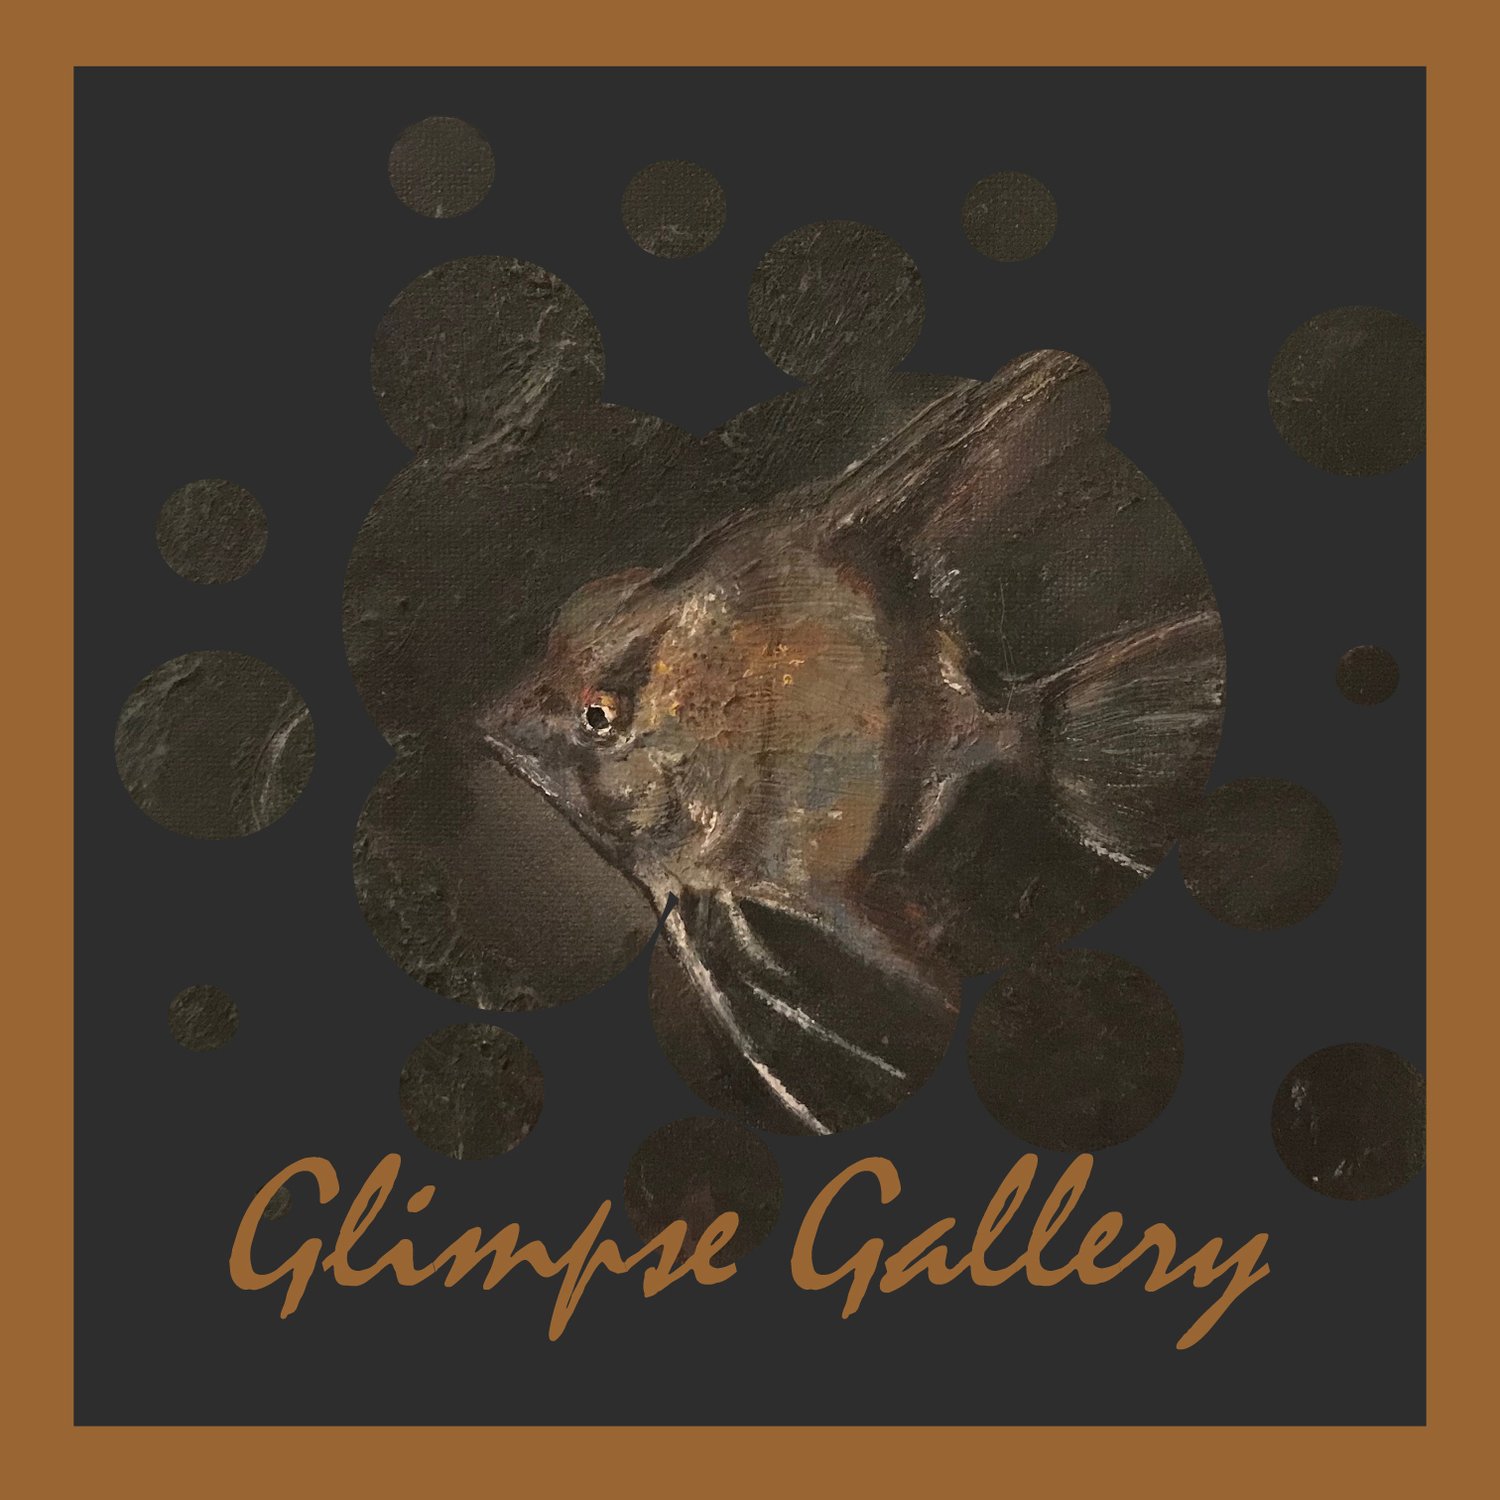 The Glimpse Gallery